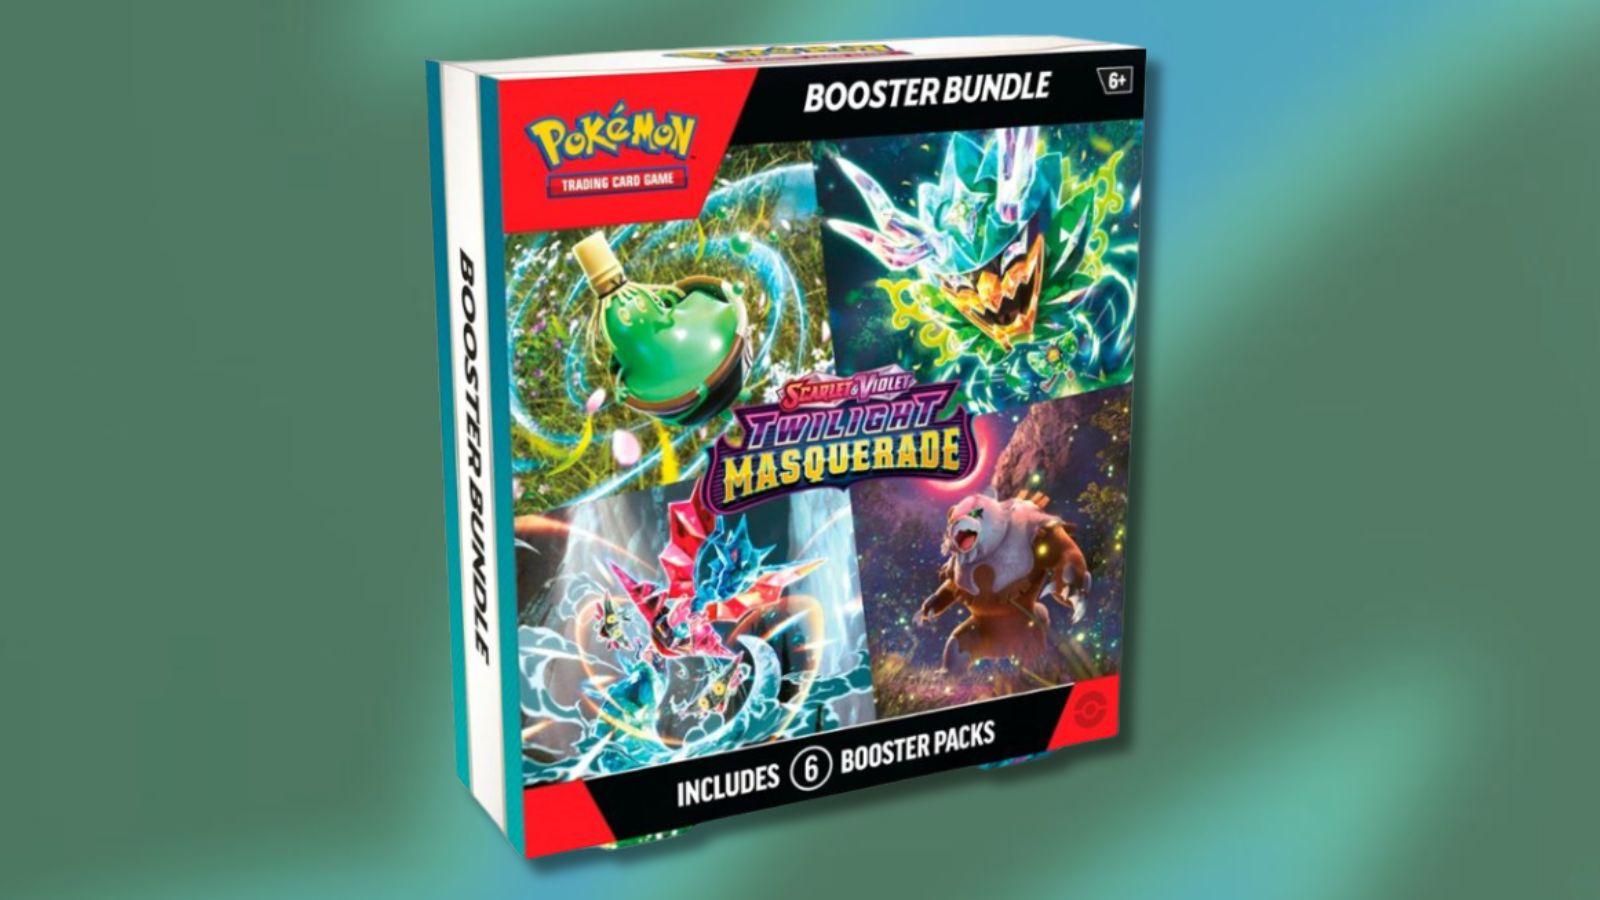 Twilight Masquerade Pokemon TCG booster bundle with blurry pattern background.